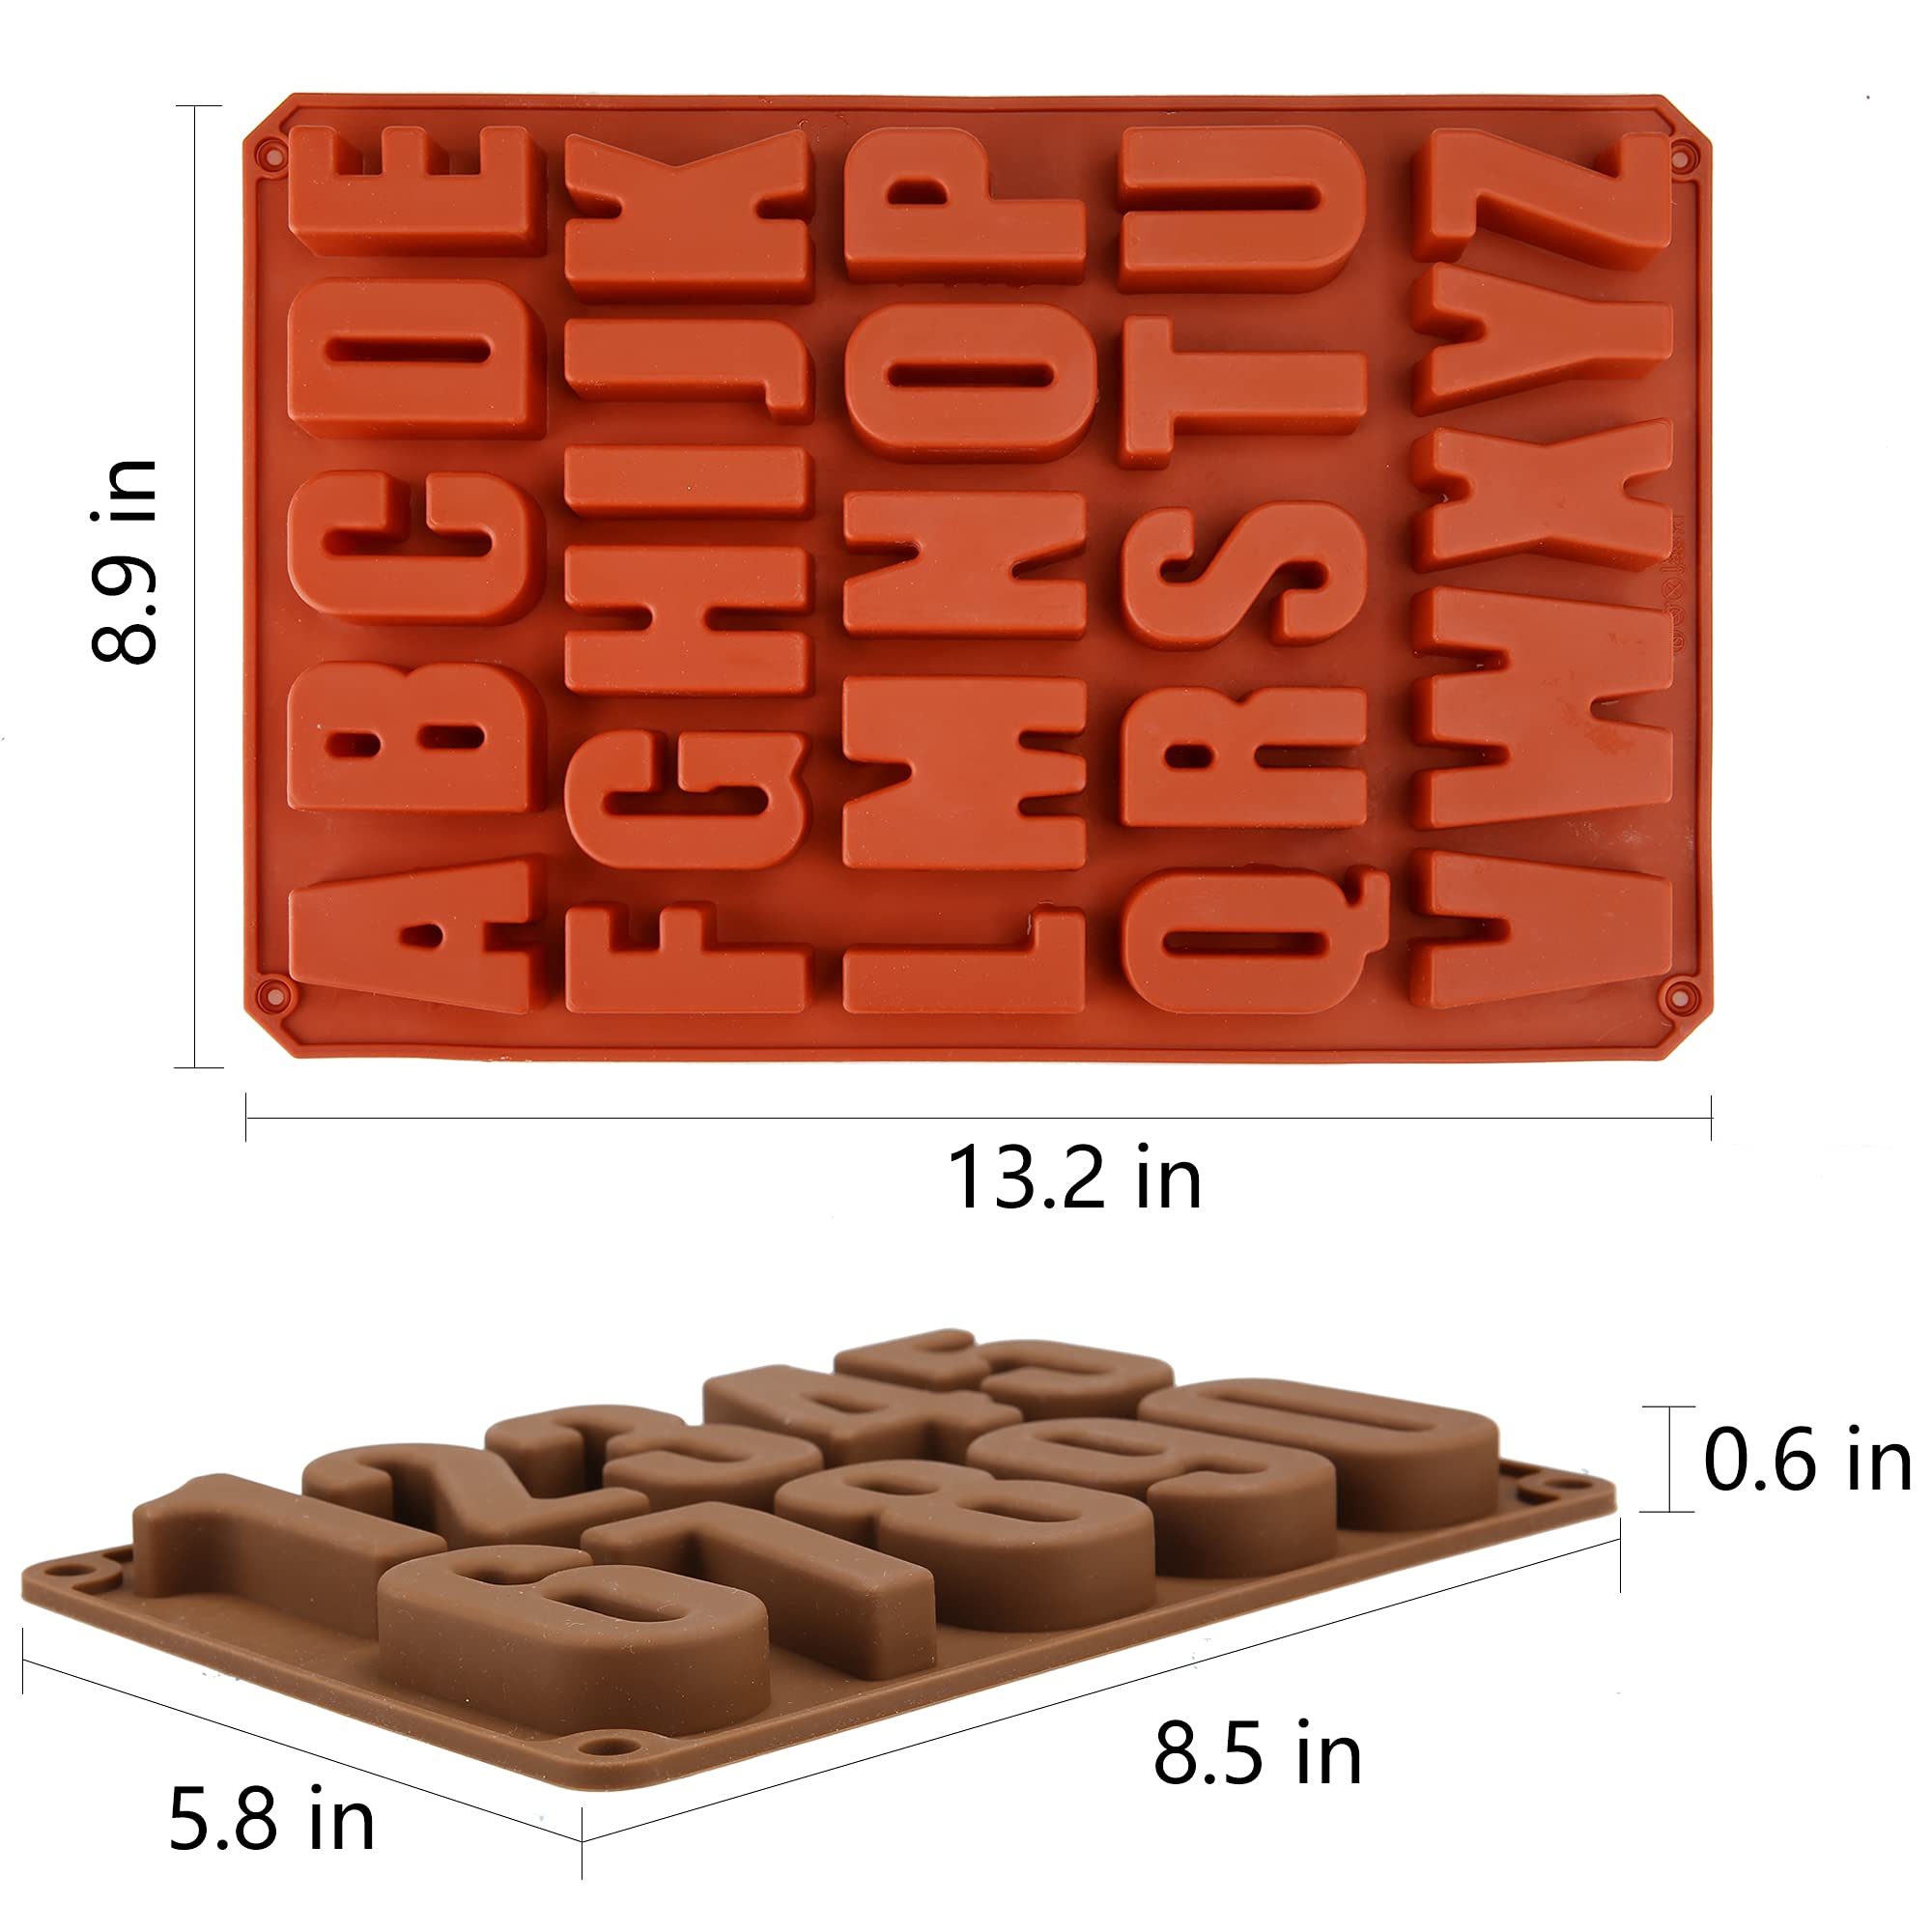 Wocuz 2 Pack Large Letter Silicone Mold Big Number Mold Alphabet Crayon Mold Chocolate Mold Caking Baking Pan Abc Baking Utensils Ice Tray Mold for Biscuit Ice Cube Chocolate Resin Concrete